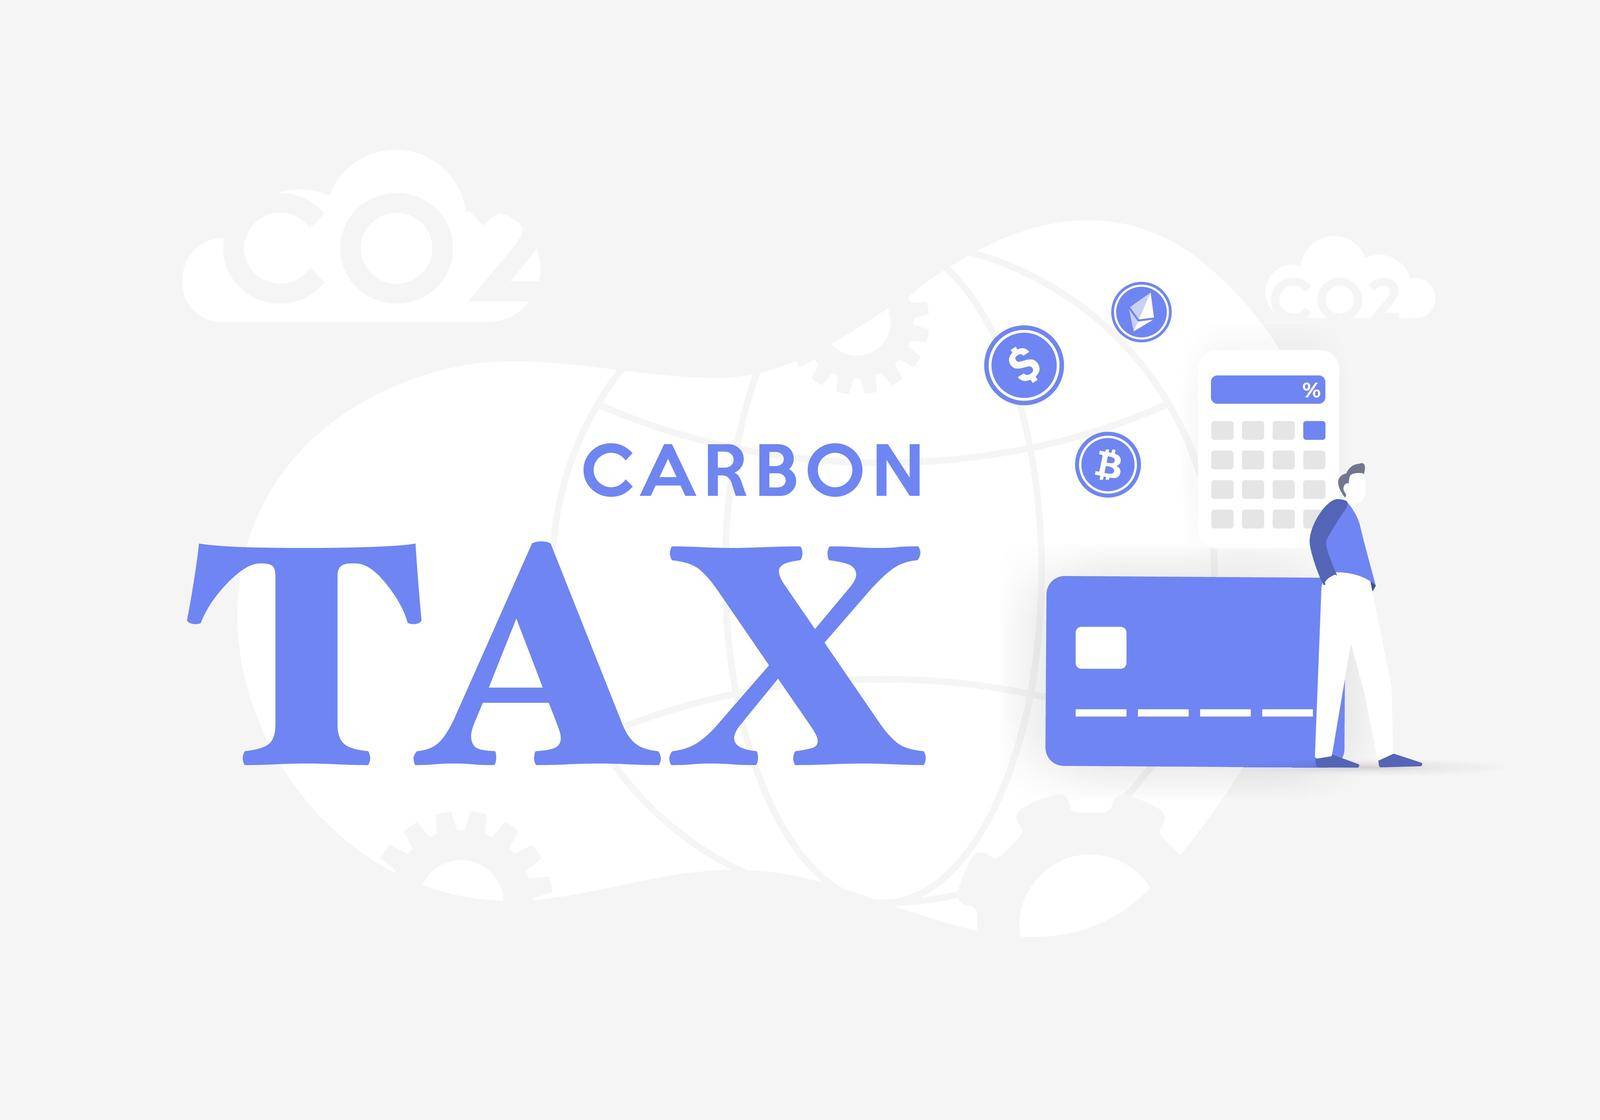 Carbon Tax concept illustration. Global Co2 Taxation for Nature Pollution and cap and trade programs. Greenhouse gas - GHG payment fee. Vector illustration in flat design